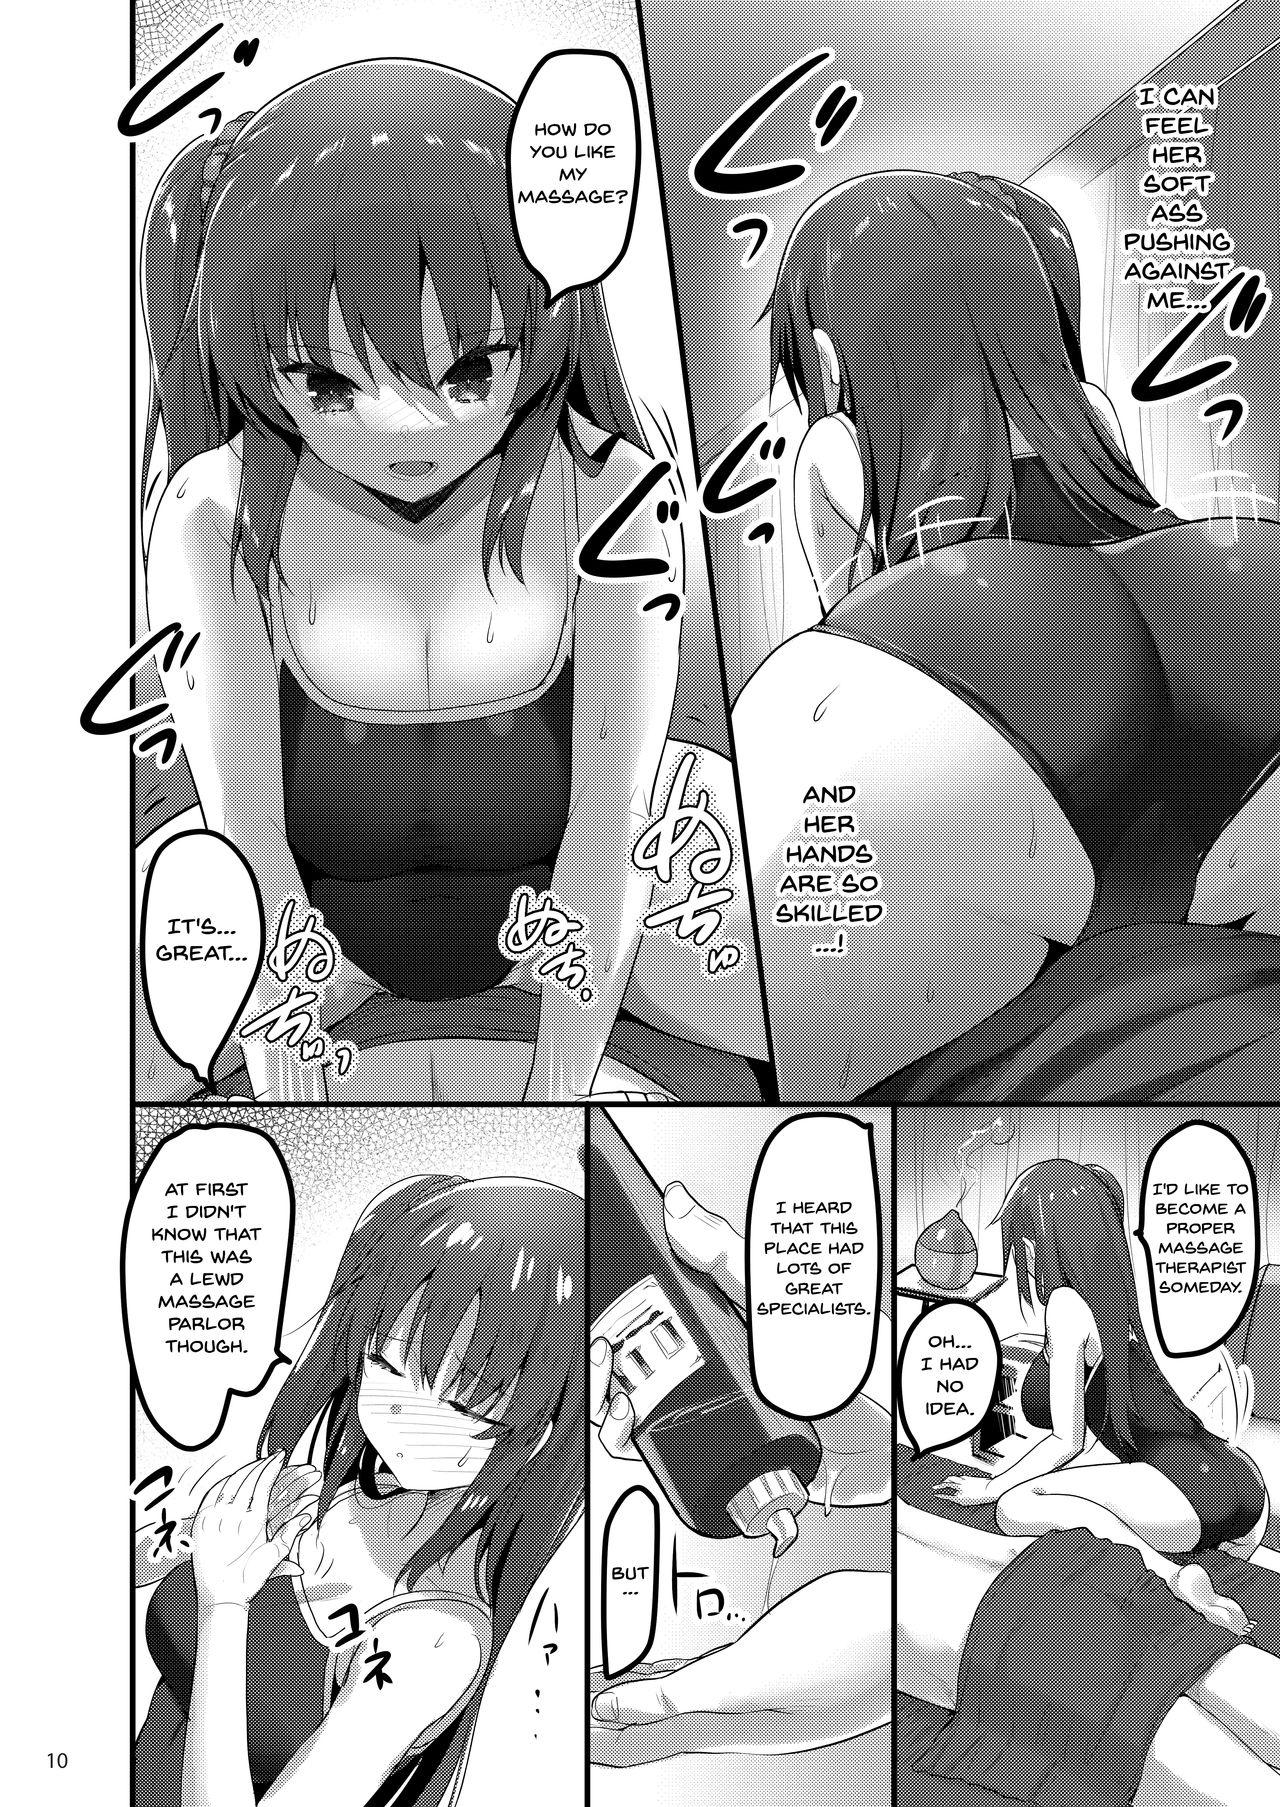 Pov Blowjob Ecchi na Massage-ya ni Kitara Classmate ga Dete Kita Hanashi | A Story Of Going Out To Get a Massage And The One Who Shows Up Is My Classmate - Original Doggy Style Porn - Page 9